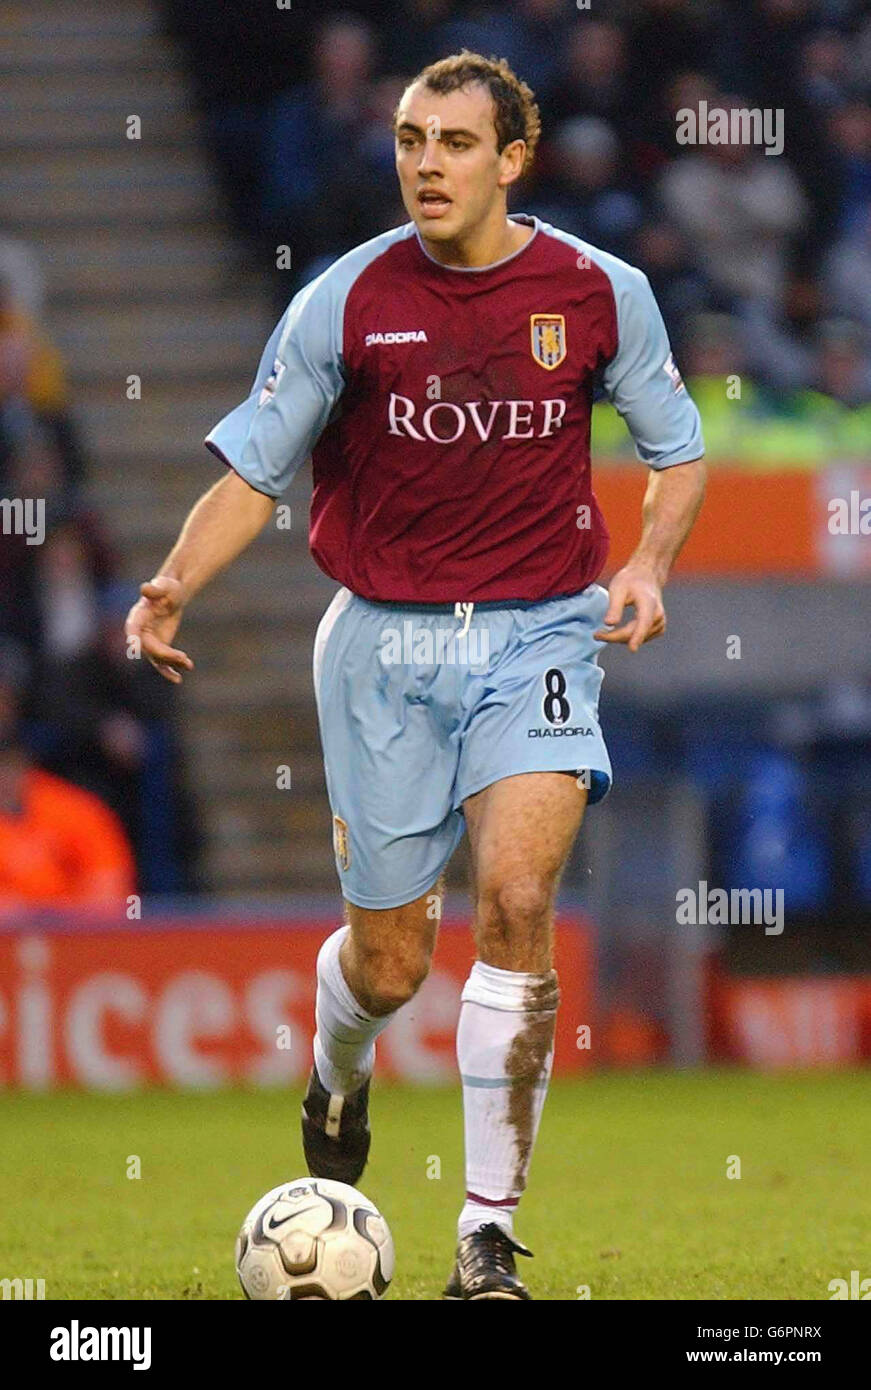 Aston Villa's Gavin McCann, during the Barclaycard Premiership match against Leicester City at the Walker's Stadium, Leicester. Stock Photo